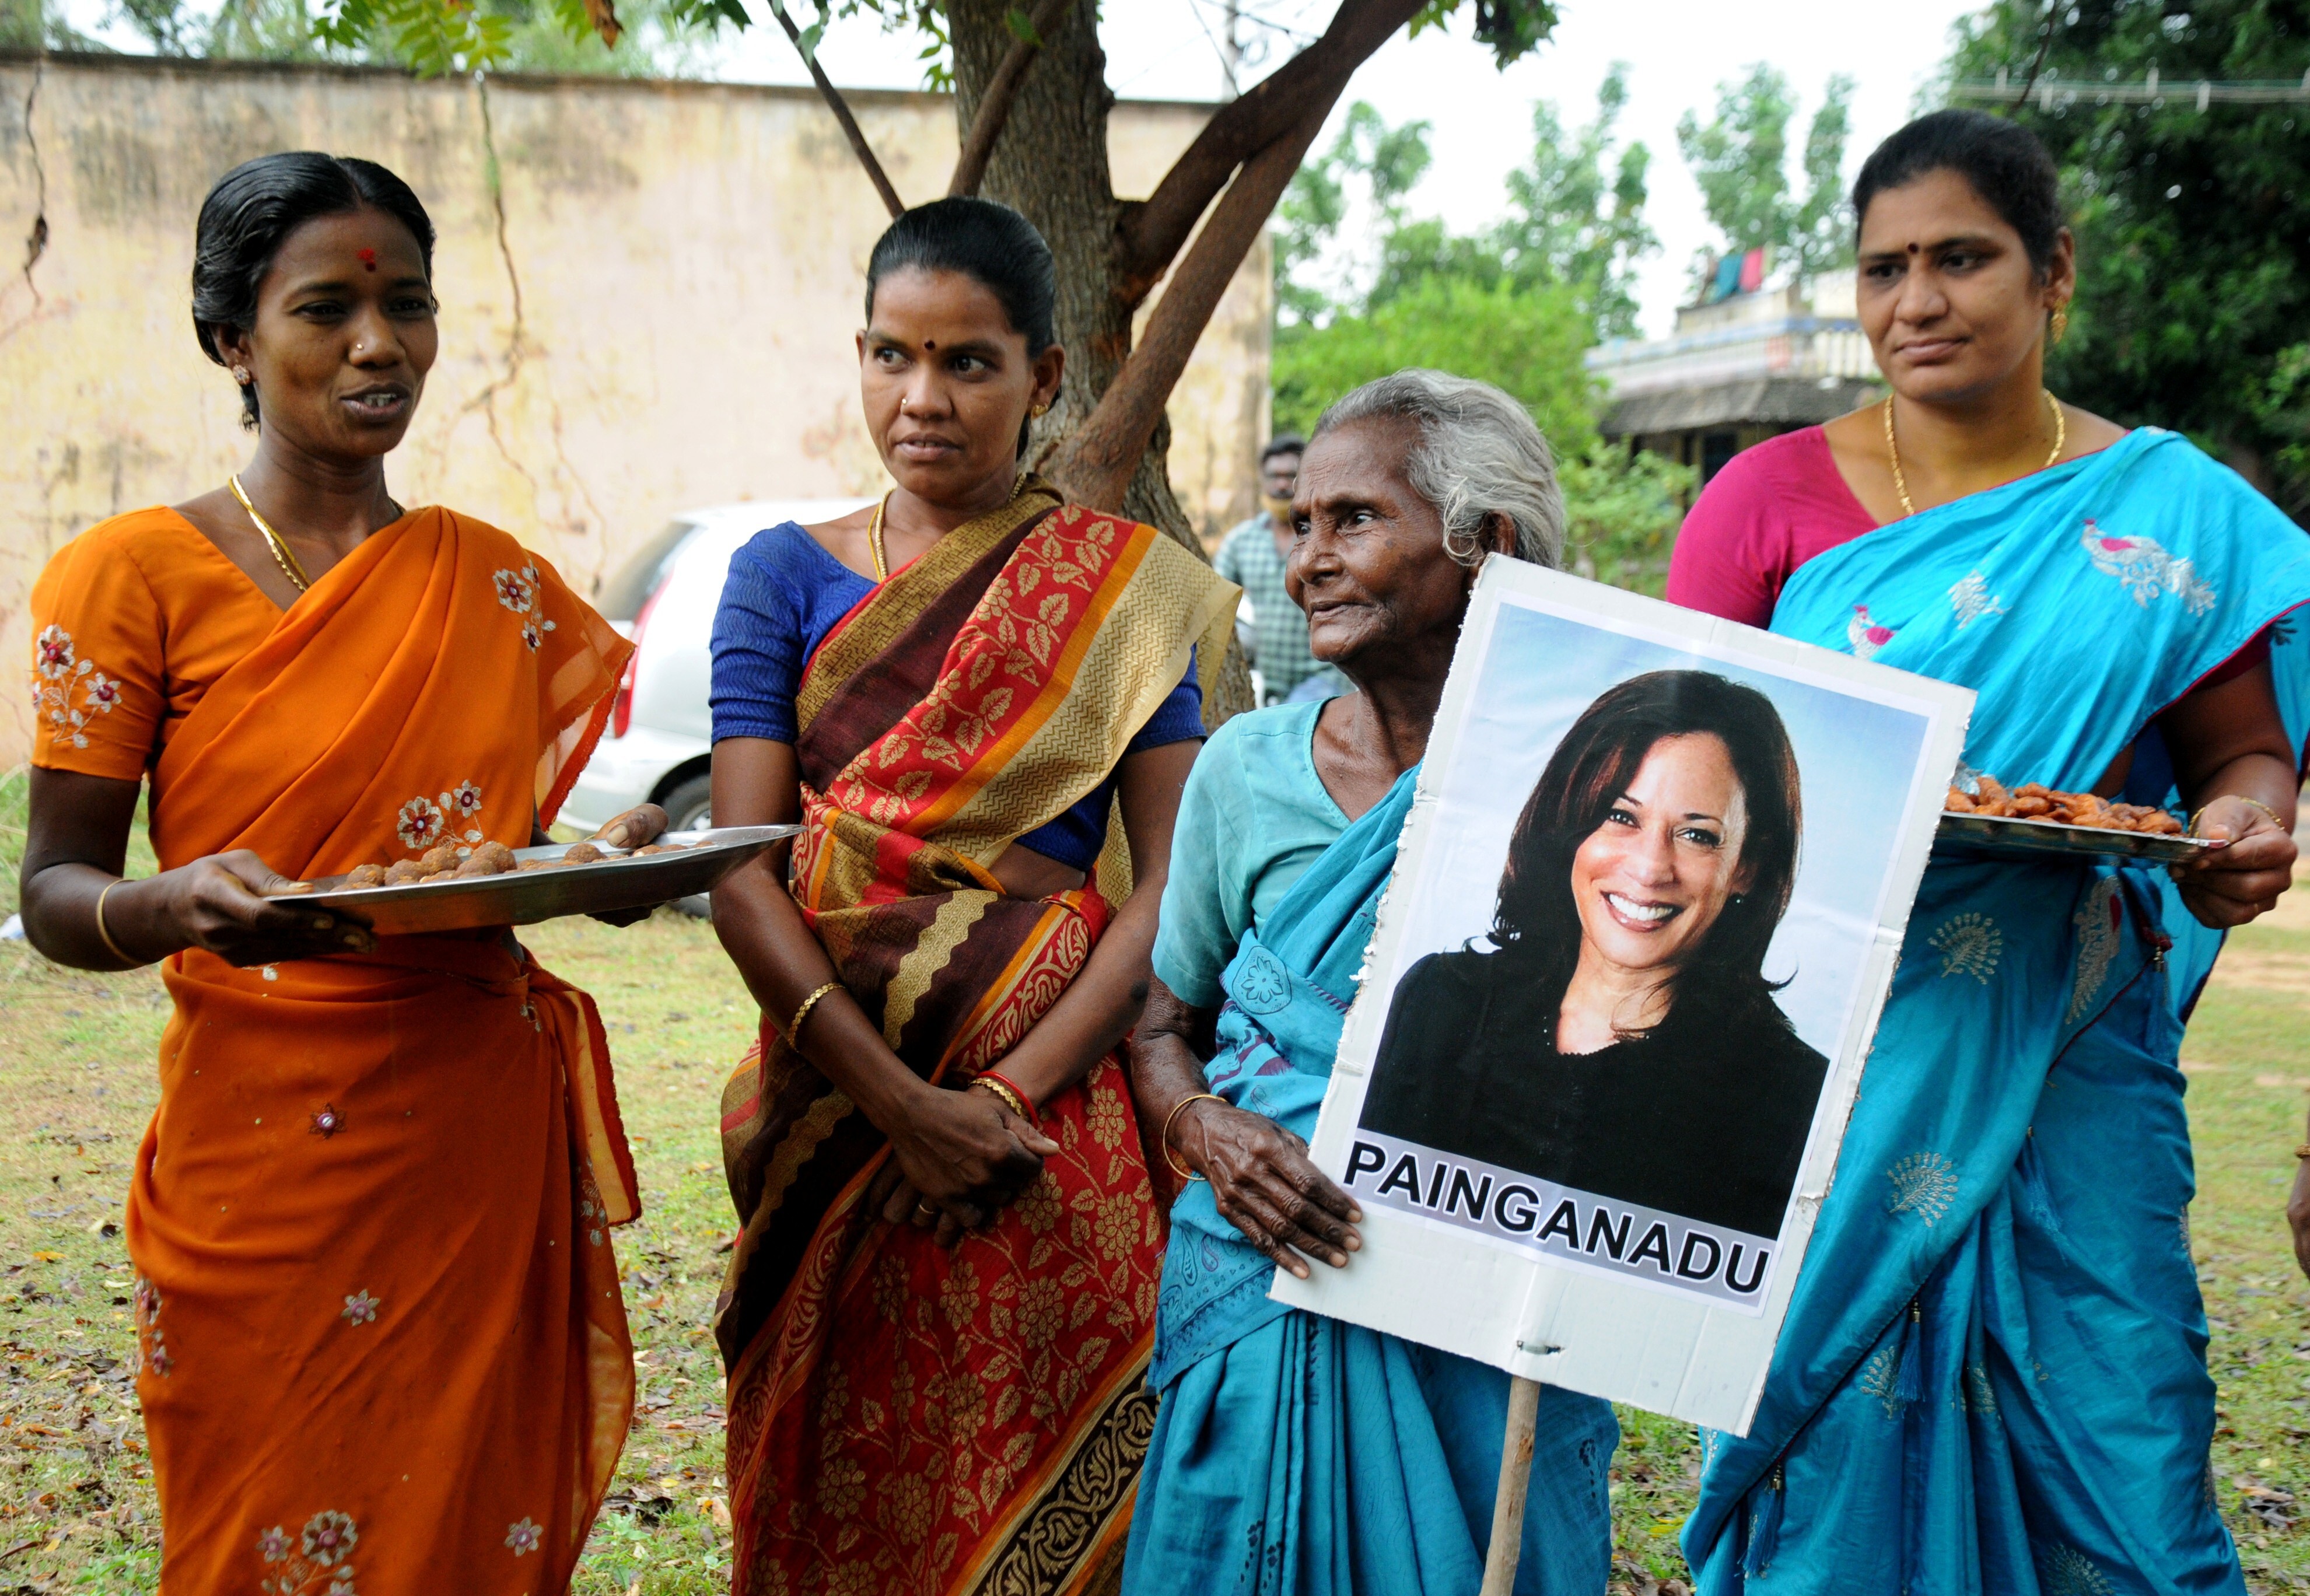 Women gather to celebrate the victory of US vice-president-elect Kamala Harris, in Painganadu, near the village of Thulasendrapuram in the state of Tamil Nadu, where Harris’ maternal grandfather was born. Photo: Reuters